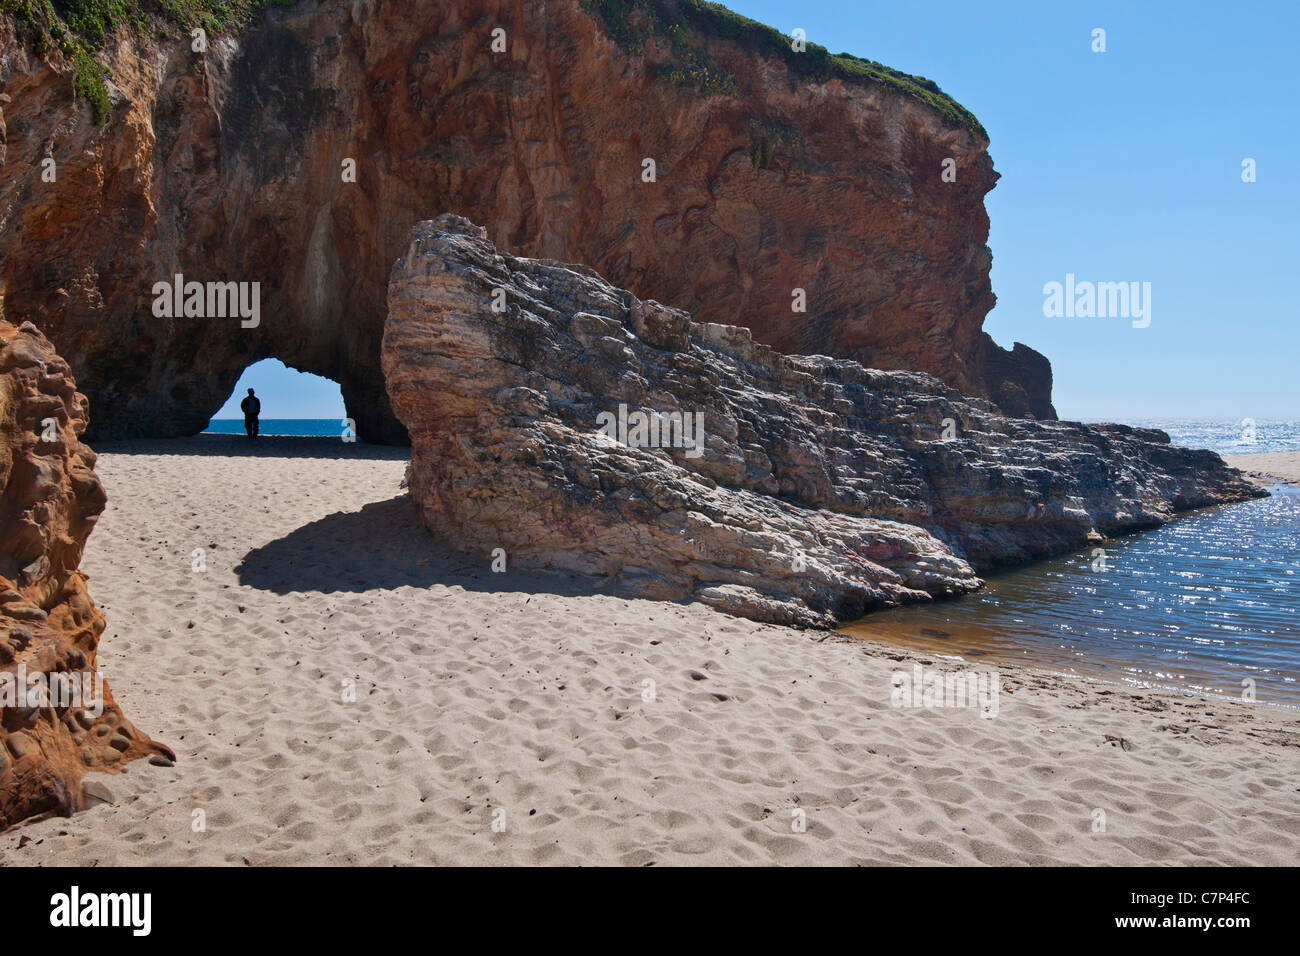 View Of The Natural Tunnel Of Hole In The Wall Beach In Santa Cruz Stock Photo Alamy